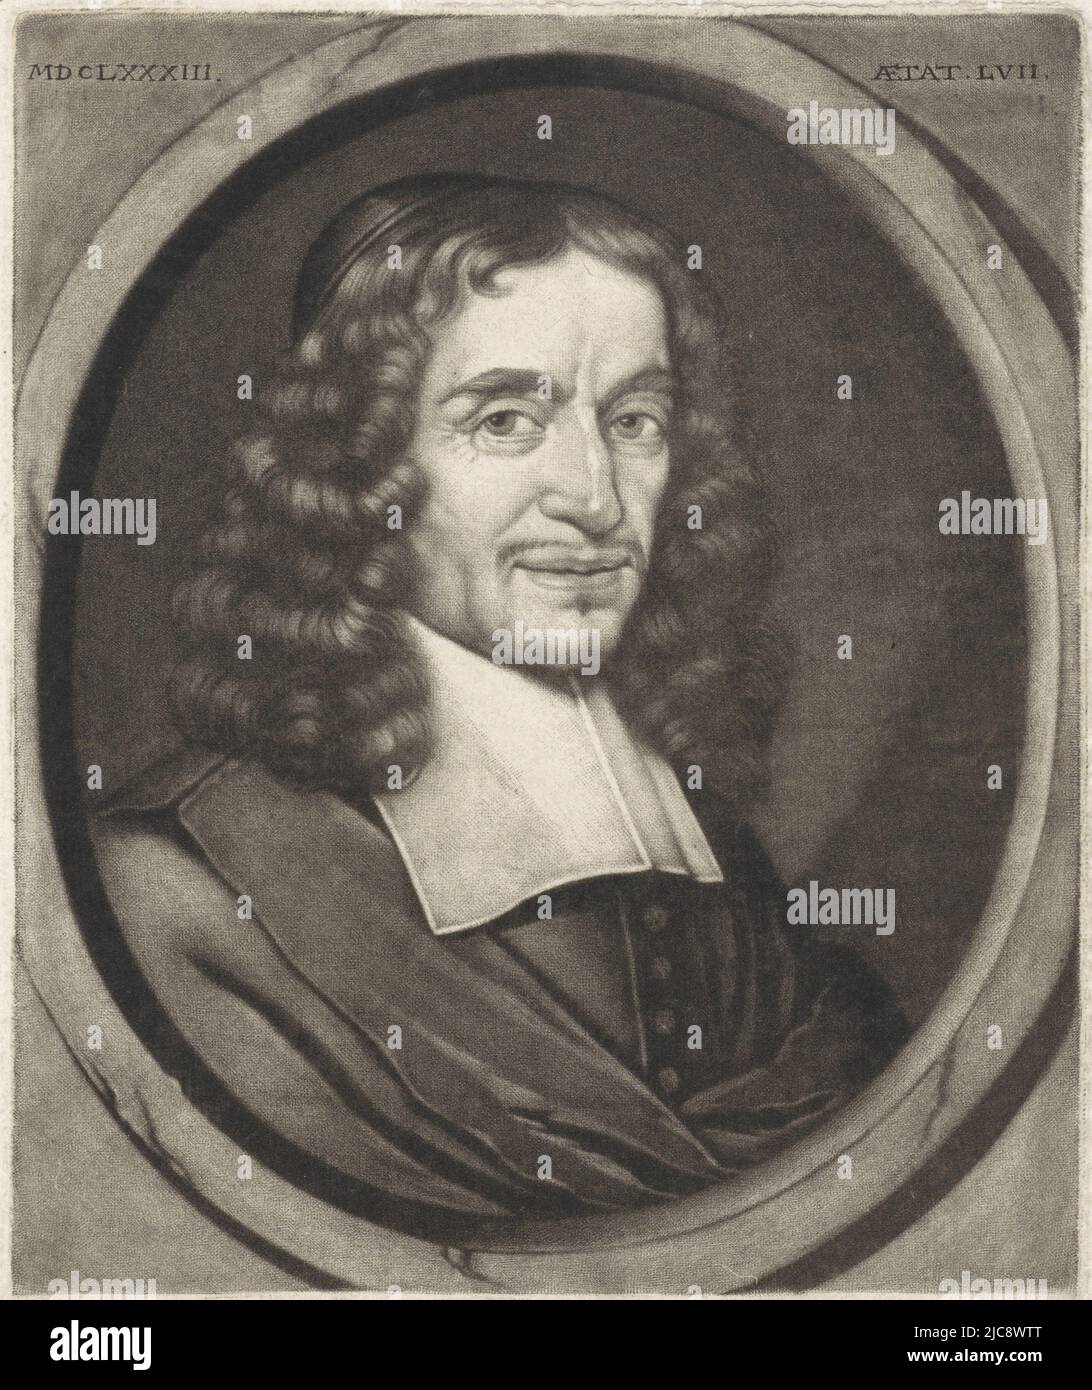 Geeraert Brandt, historian, poet and playwright in Amsterdam at age 57. Portrait of Geeraert Brandt, print maker: Pieter Schenk (I), (mentioned on object), after: Michiel van Musscher, (mentioned on object), publisher: Pieter Schenk (I), (mentioned on object), Amsterdam, 1683 - 1713, paper, engraving, h 193 mm × w 134 mm Stock Photo